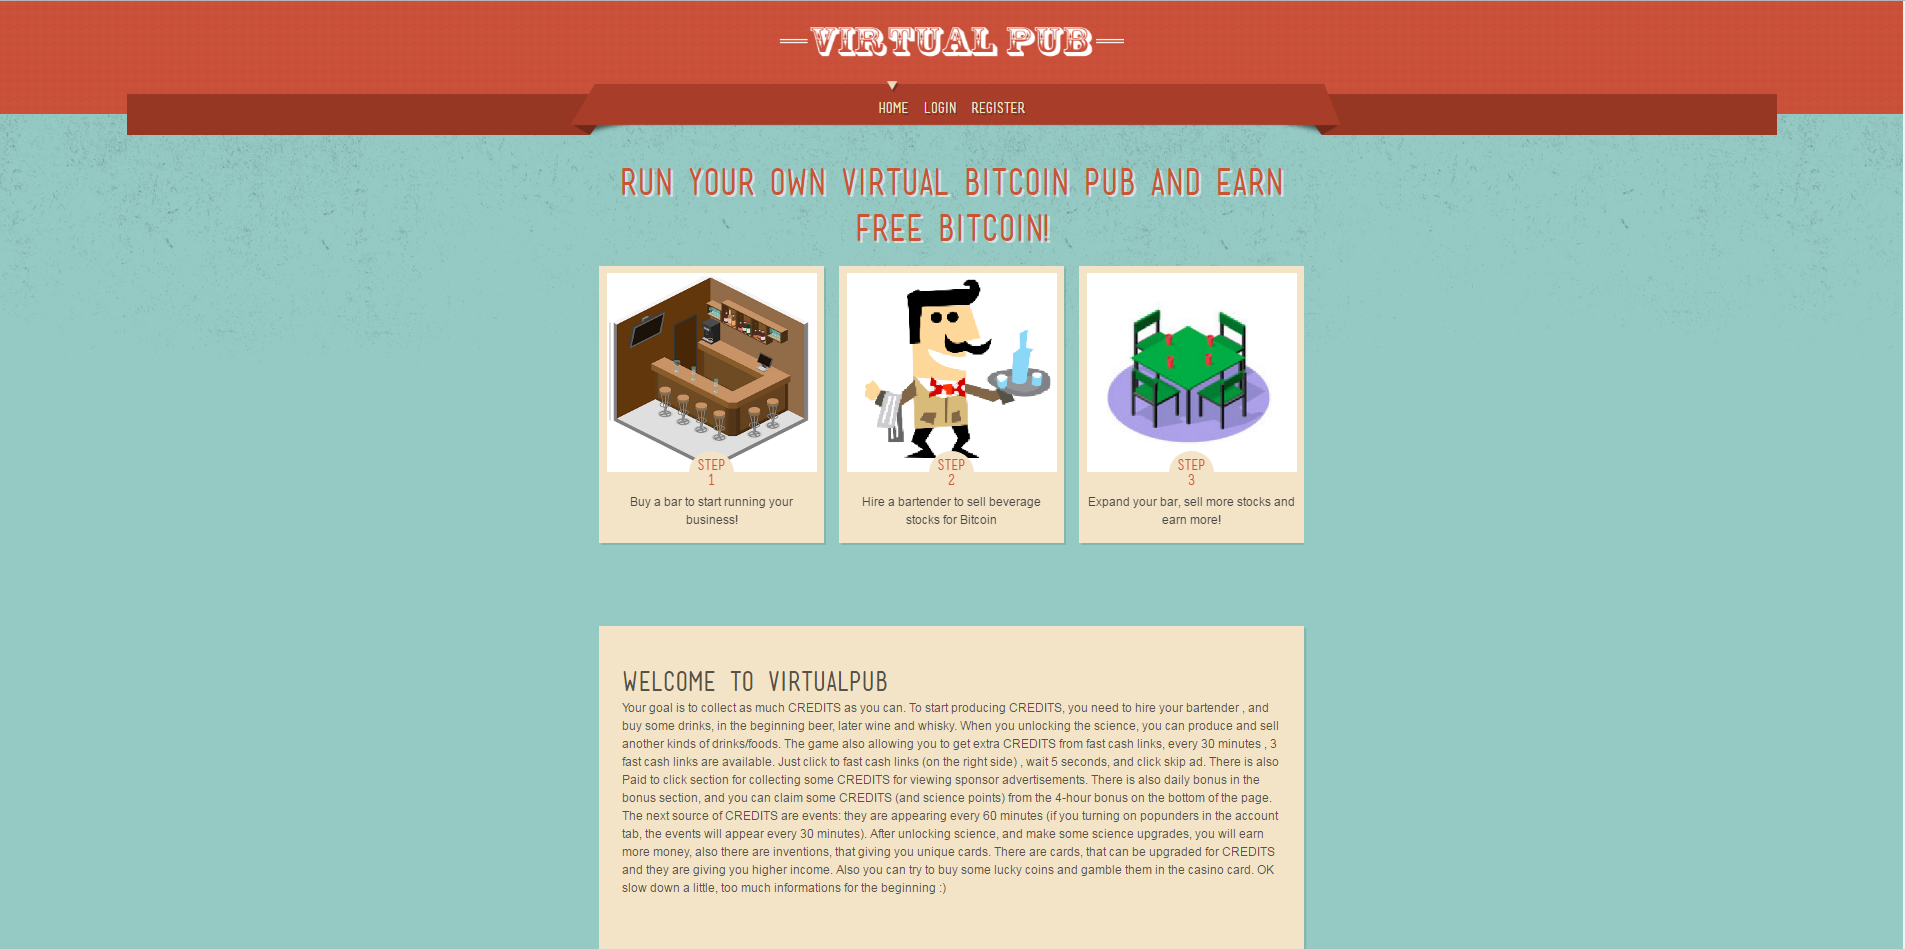 Virtualpub Io Earn Bitcoins By Running Your Own Business Game - 